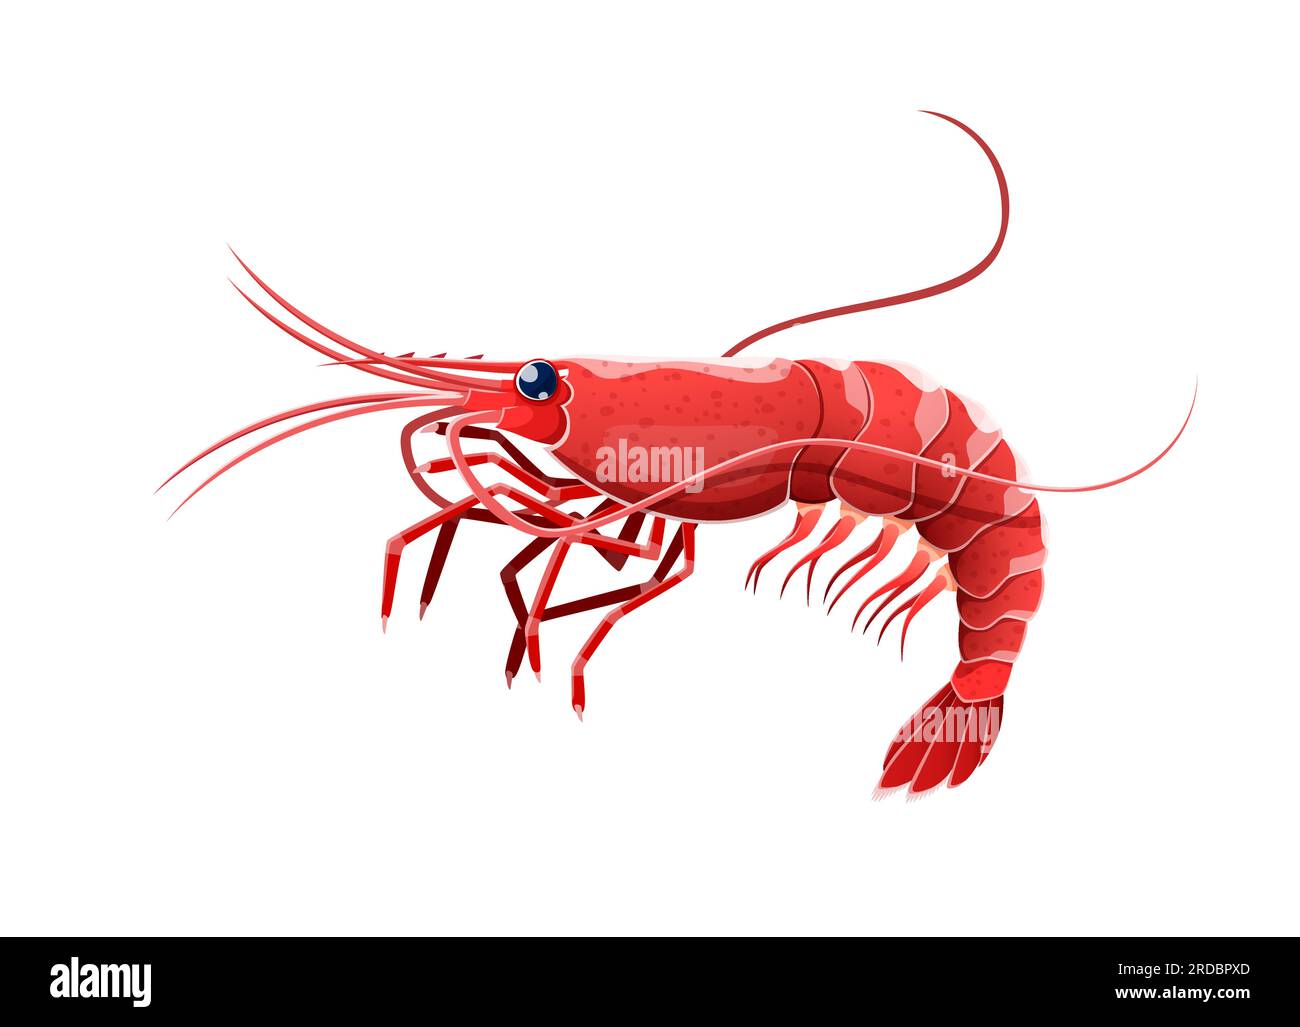 Cartoon shrimp or prawn sea animal. Isolated small crustacean with slender body covered with hard exoskeleton and long antennae, found in marine habitats, prized for succulent meat in culinary dishes Stock Vector